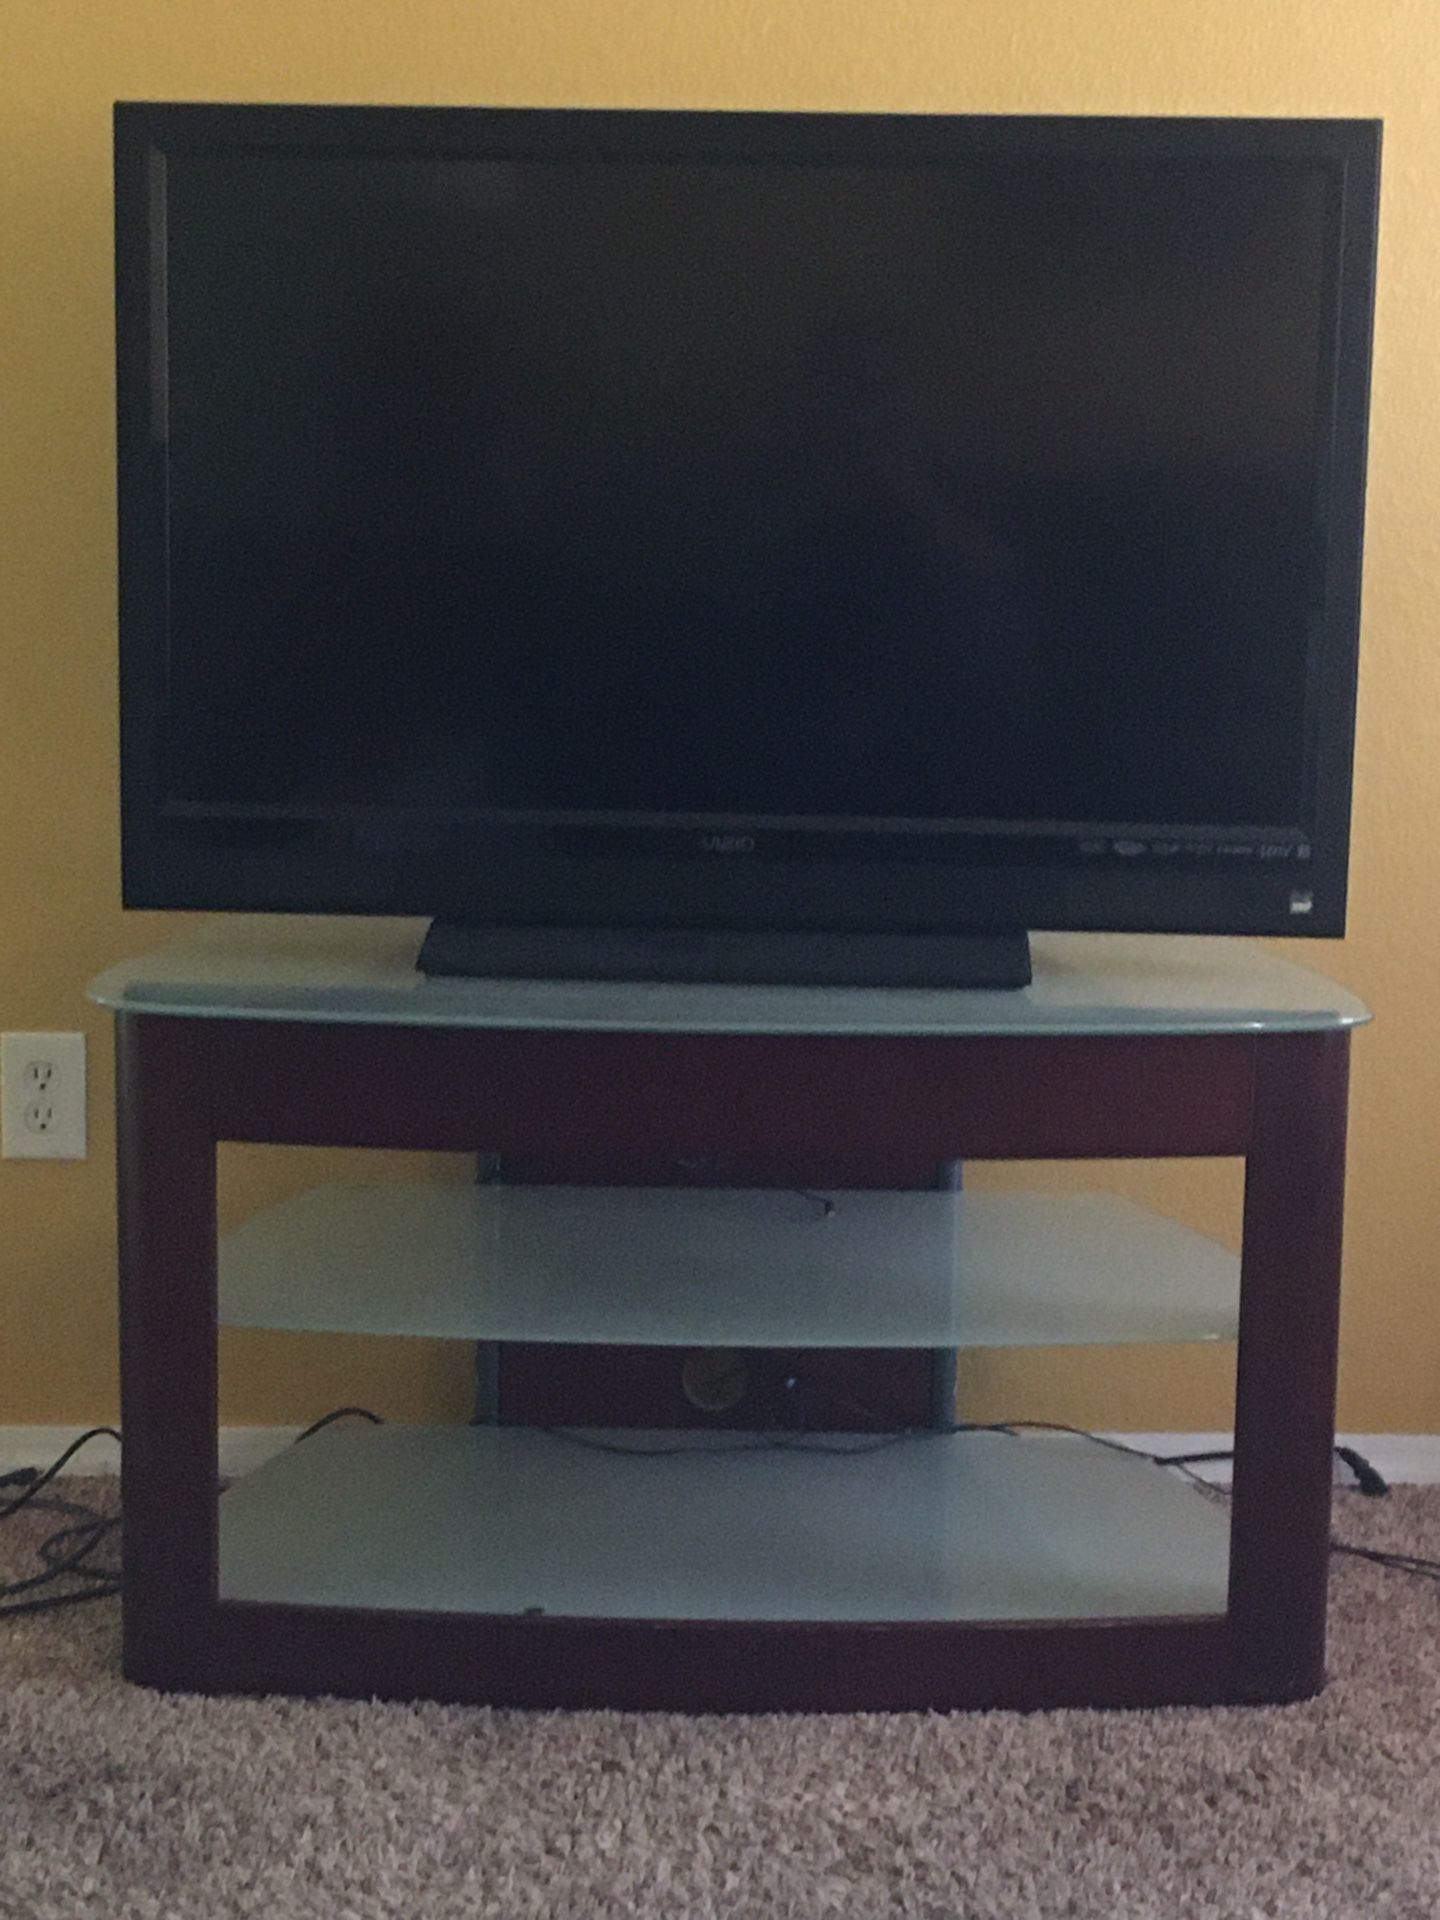 42”Vizio TV (not a smart tv) with tv stand